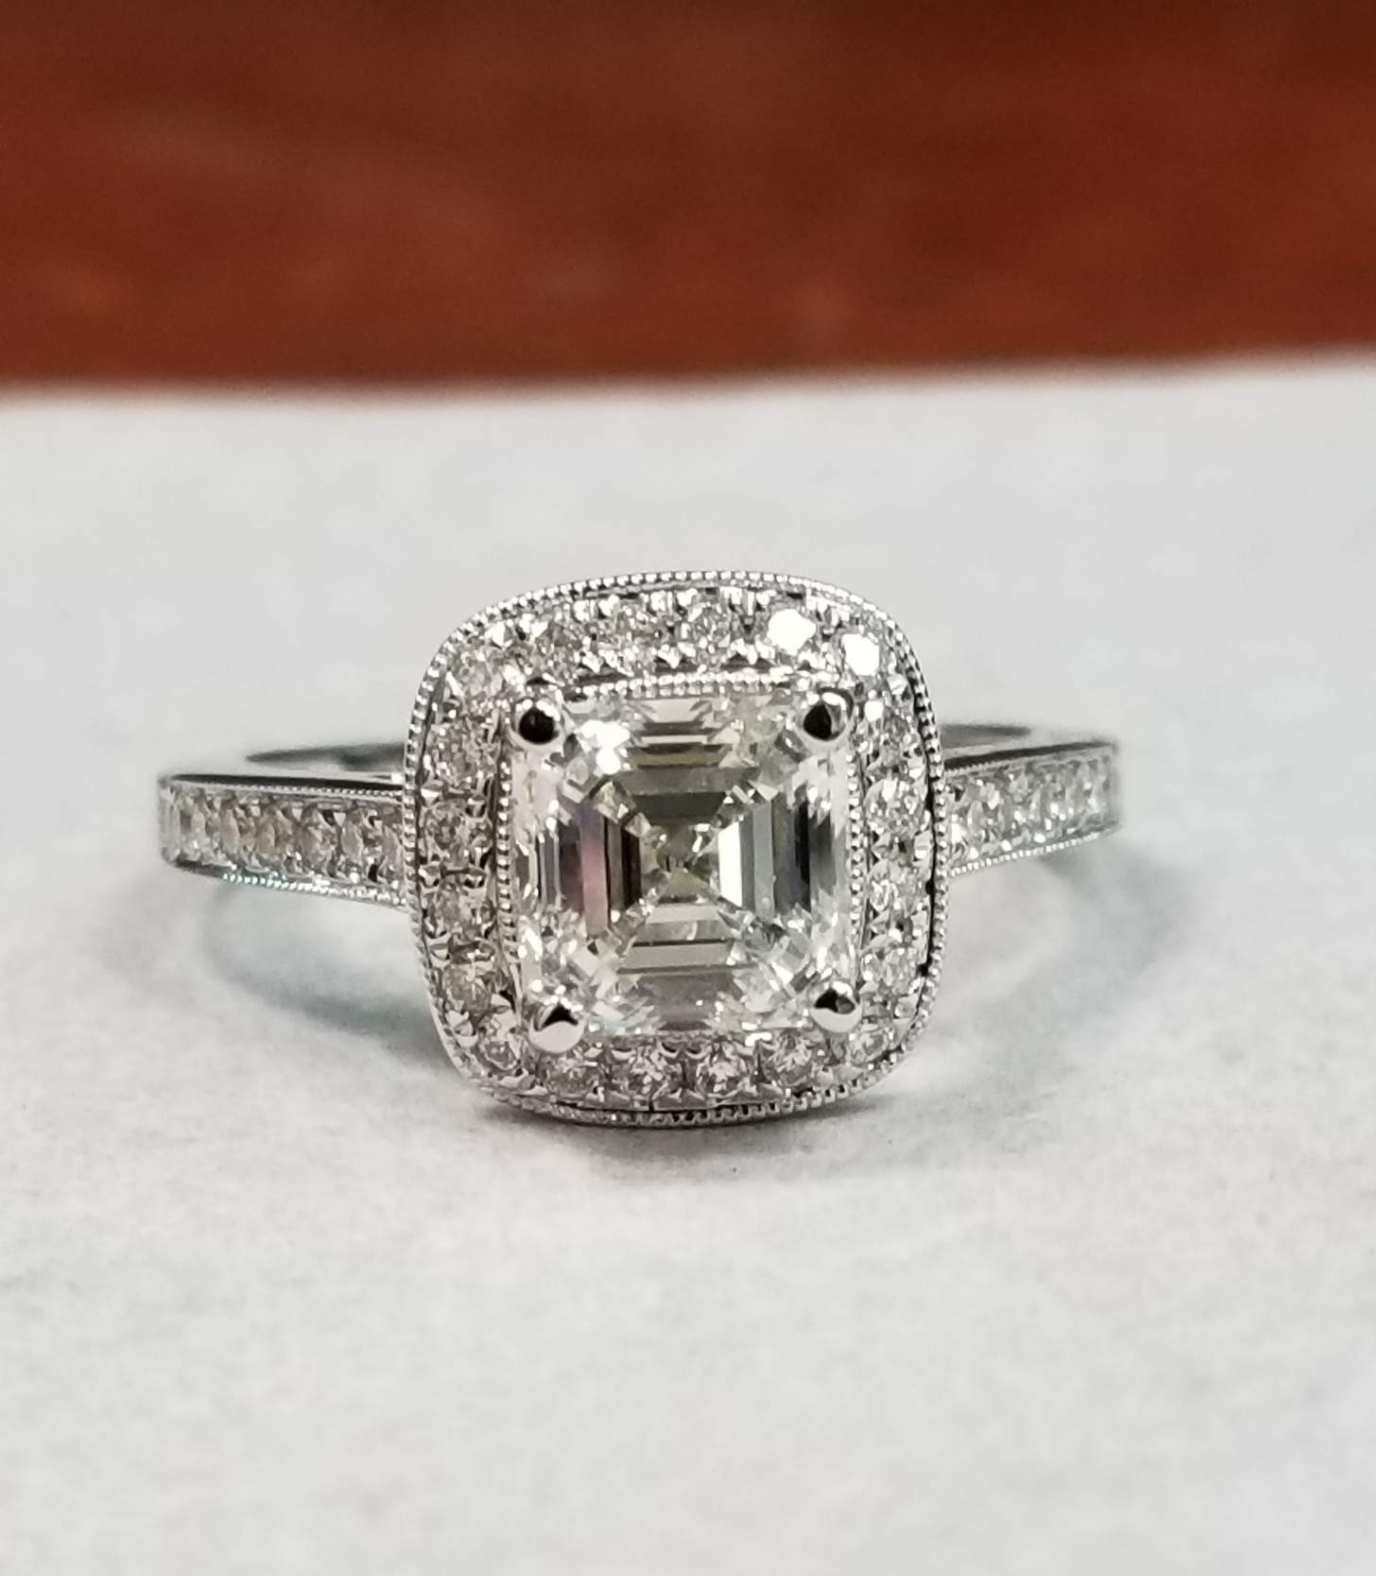 A close up of a diamond ring with a step cut diamond.